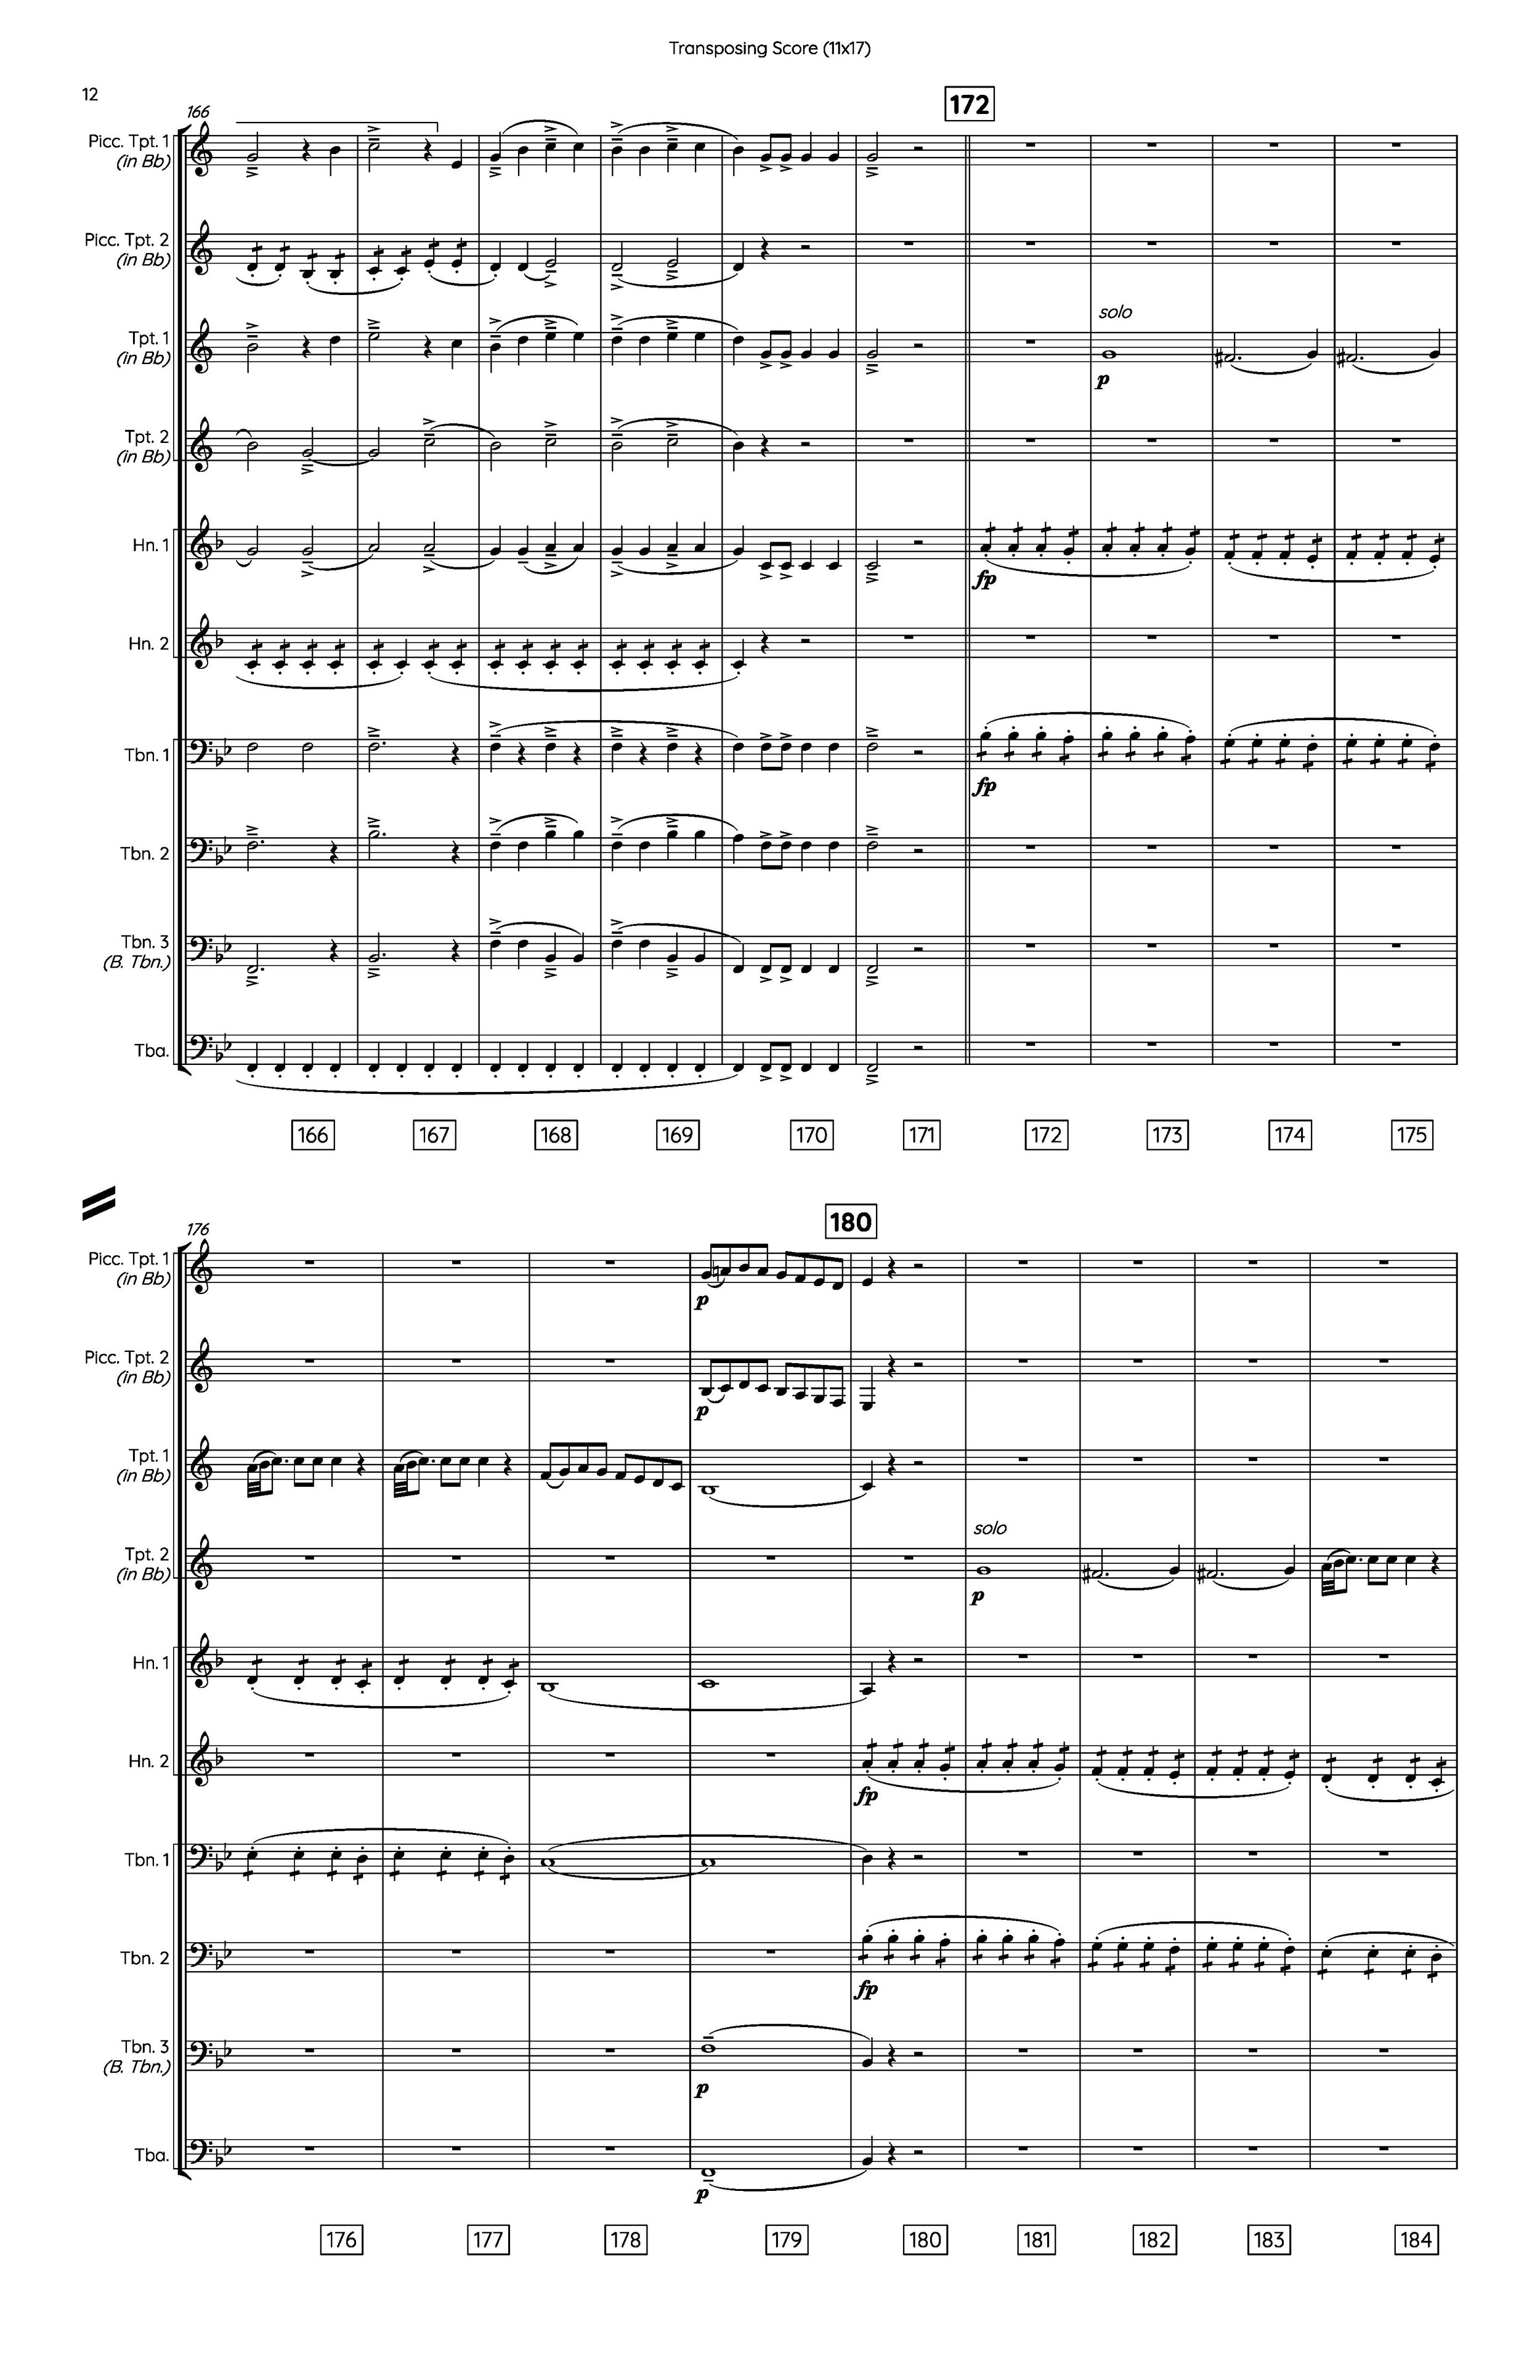 Marriage of Figaro [Brass Ensemble] in Bb - Score 11x17_Page_12.jpg